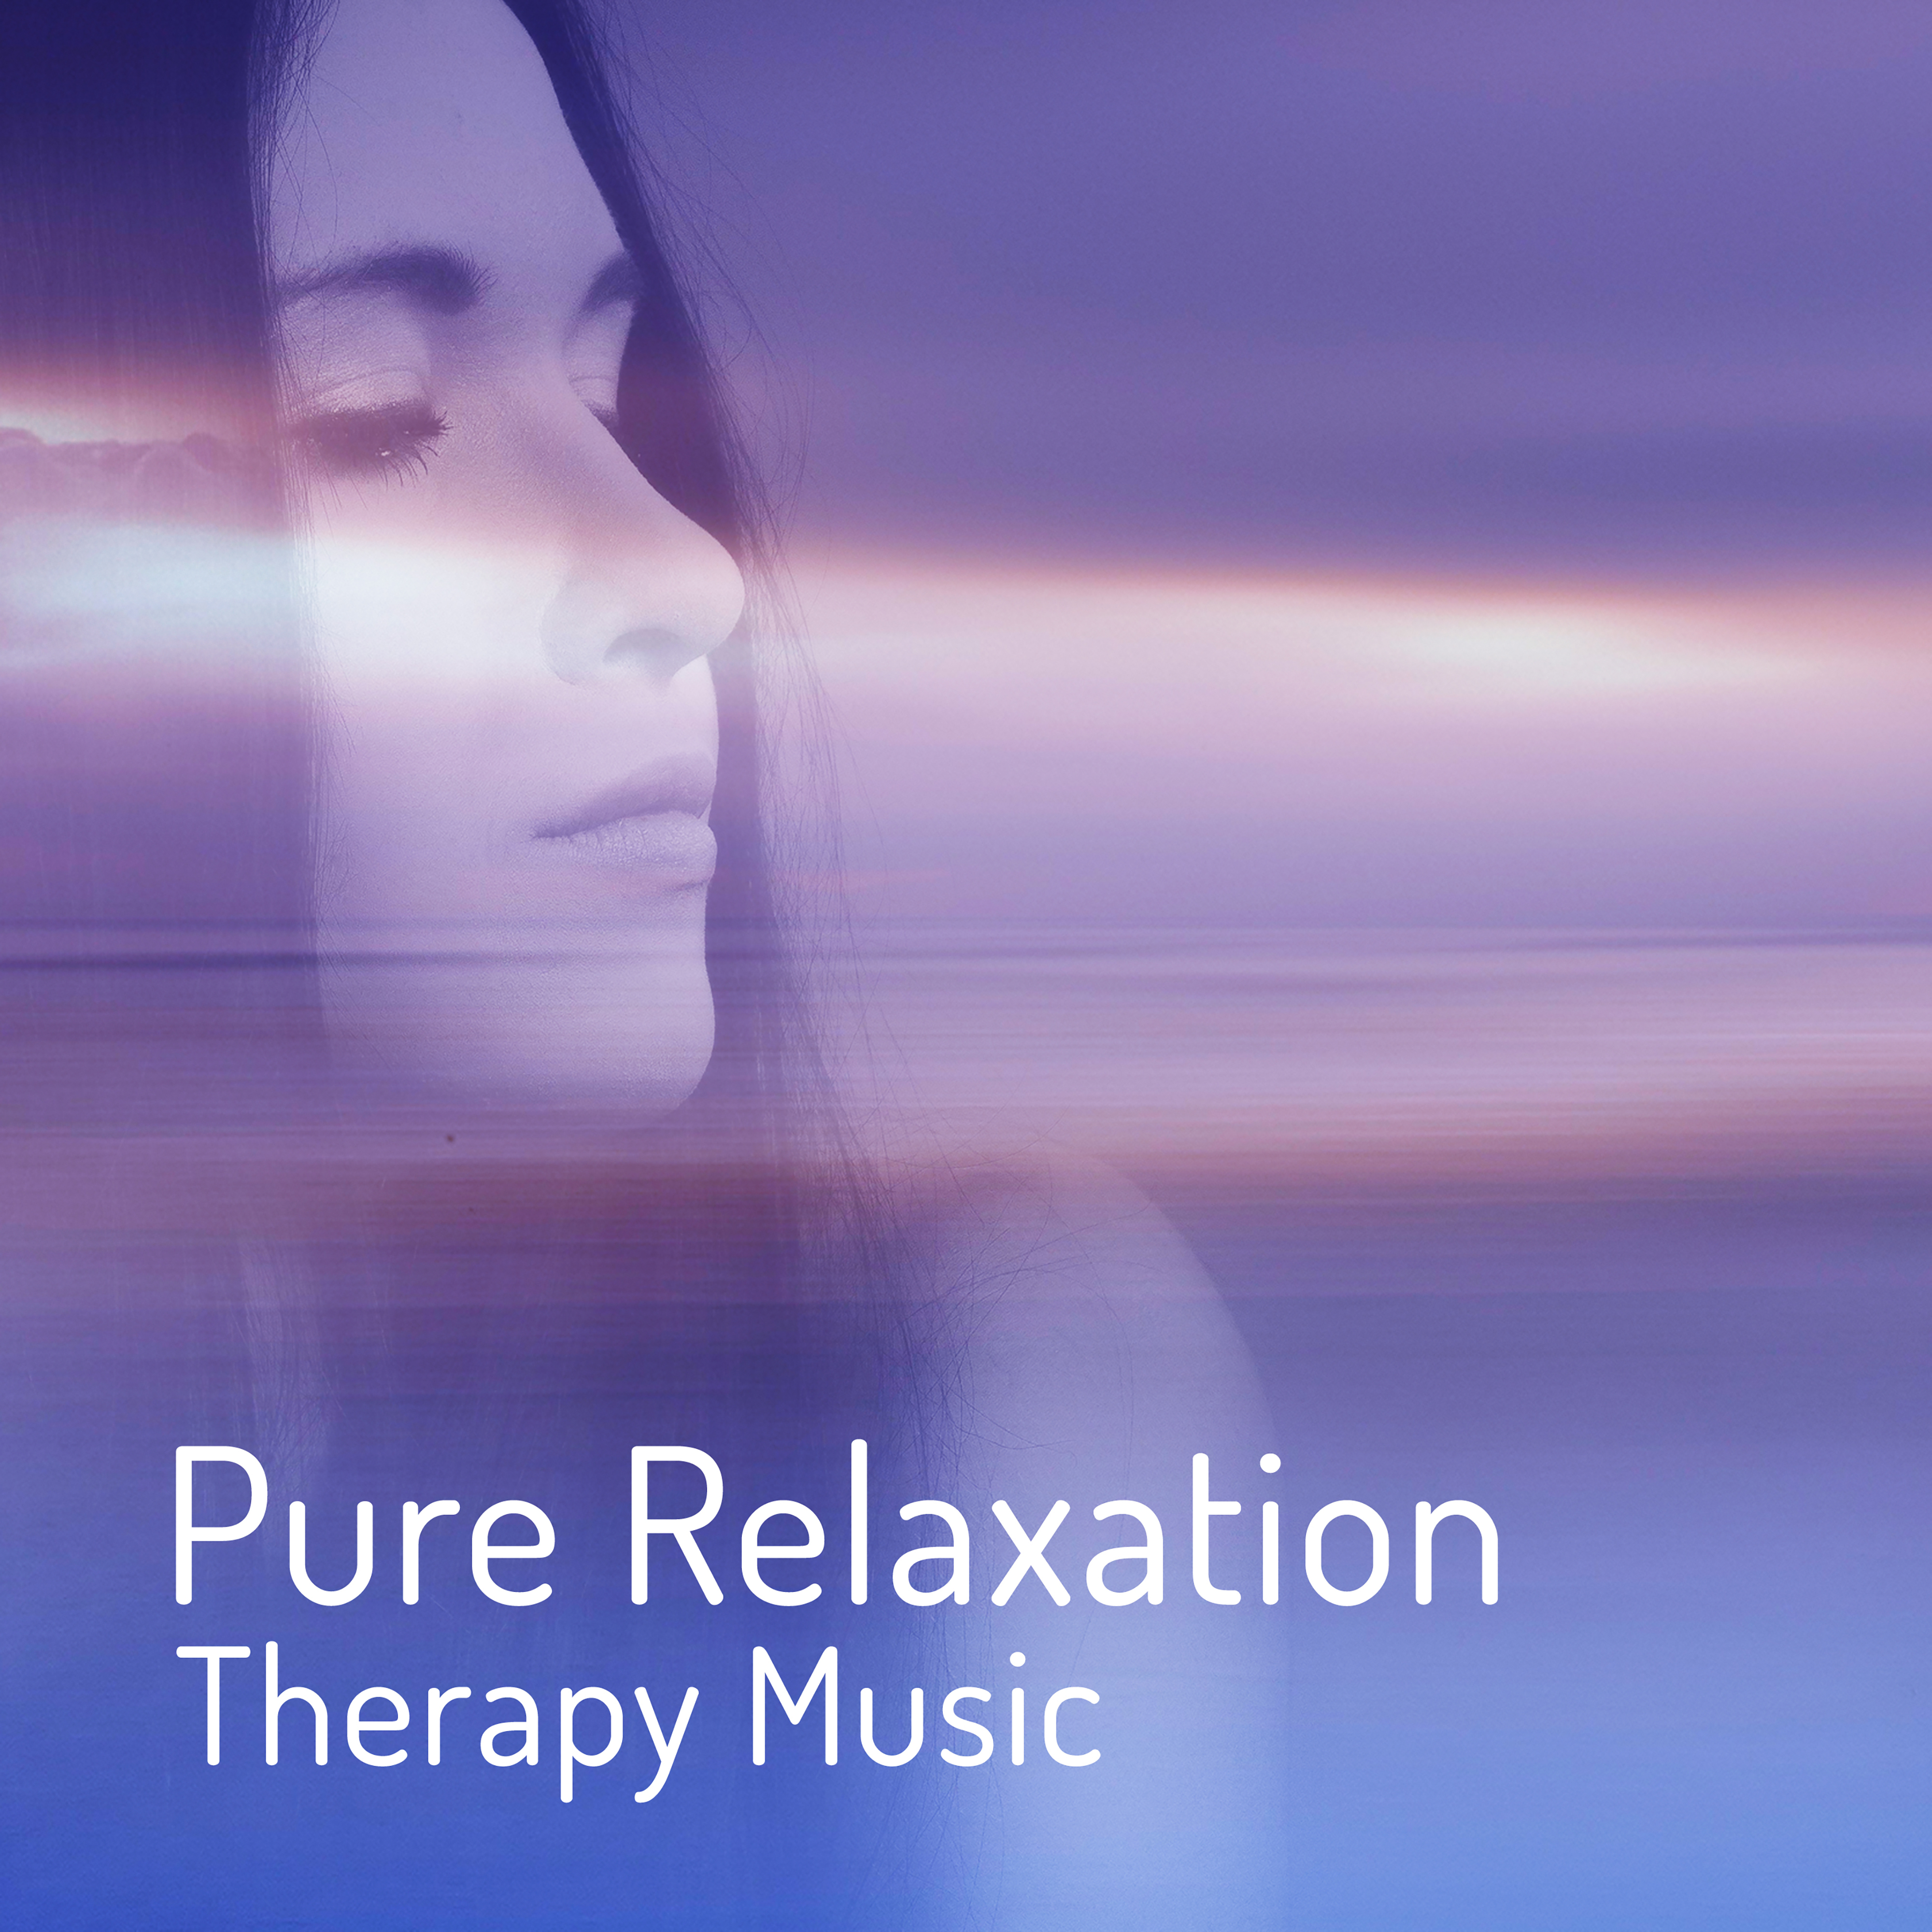 Pure Relaxation Therapy Music  Relaxing Music, Sounds of Nature, Rest After Work, New Age Collection